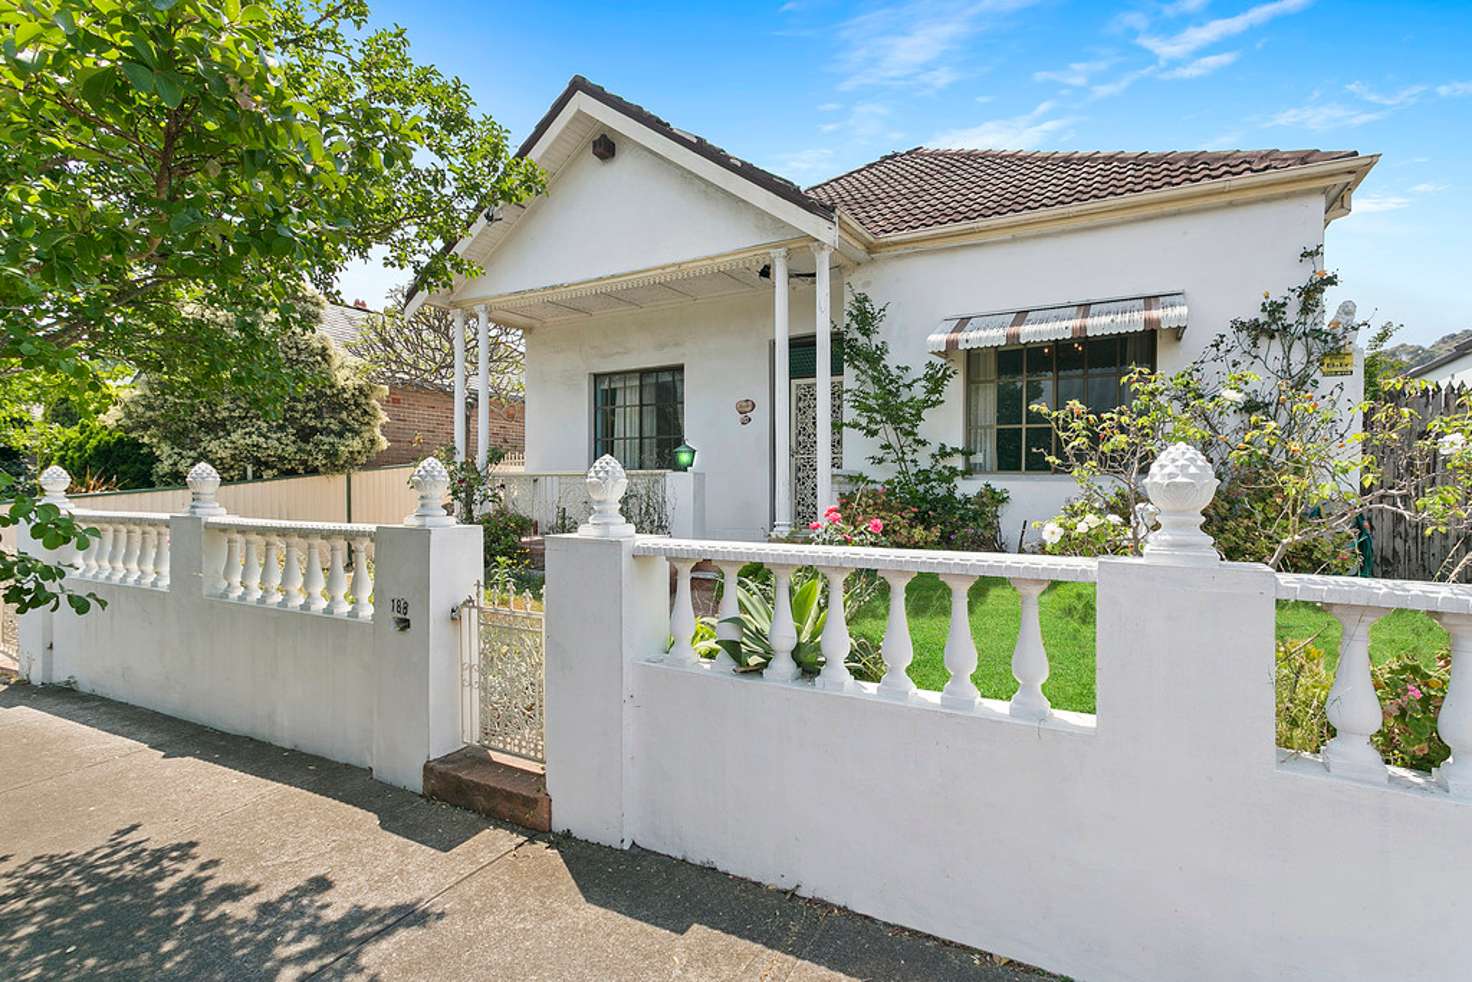 Main view of Homely house listing, 188 Doncaster Avenue, Kensington NSW 2033